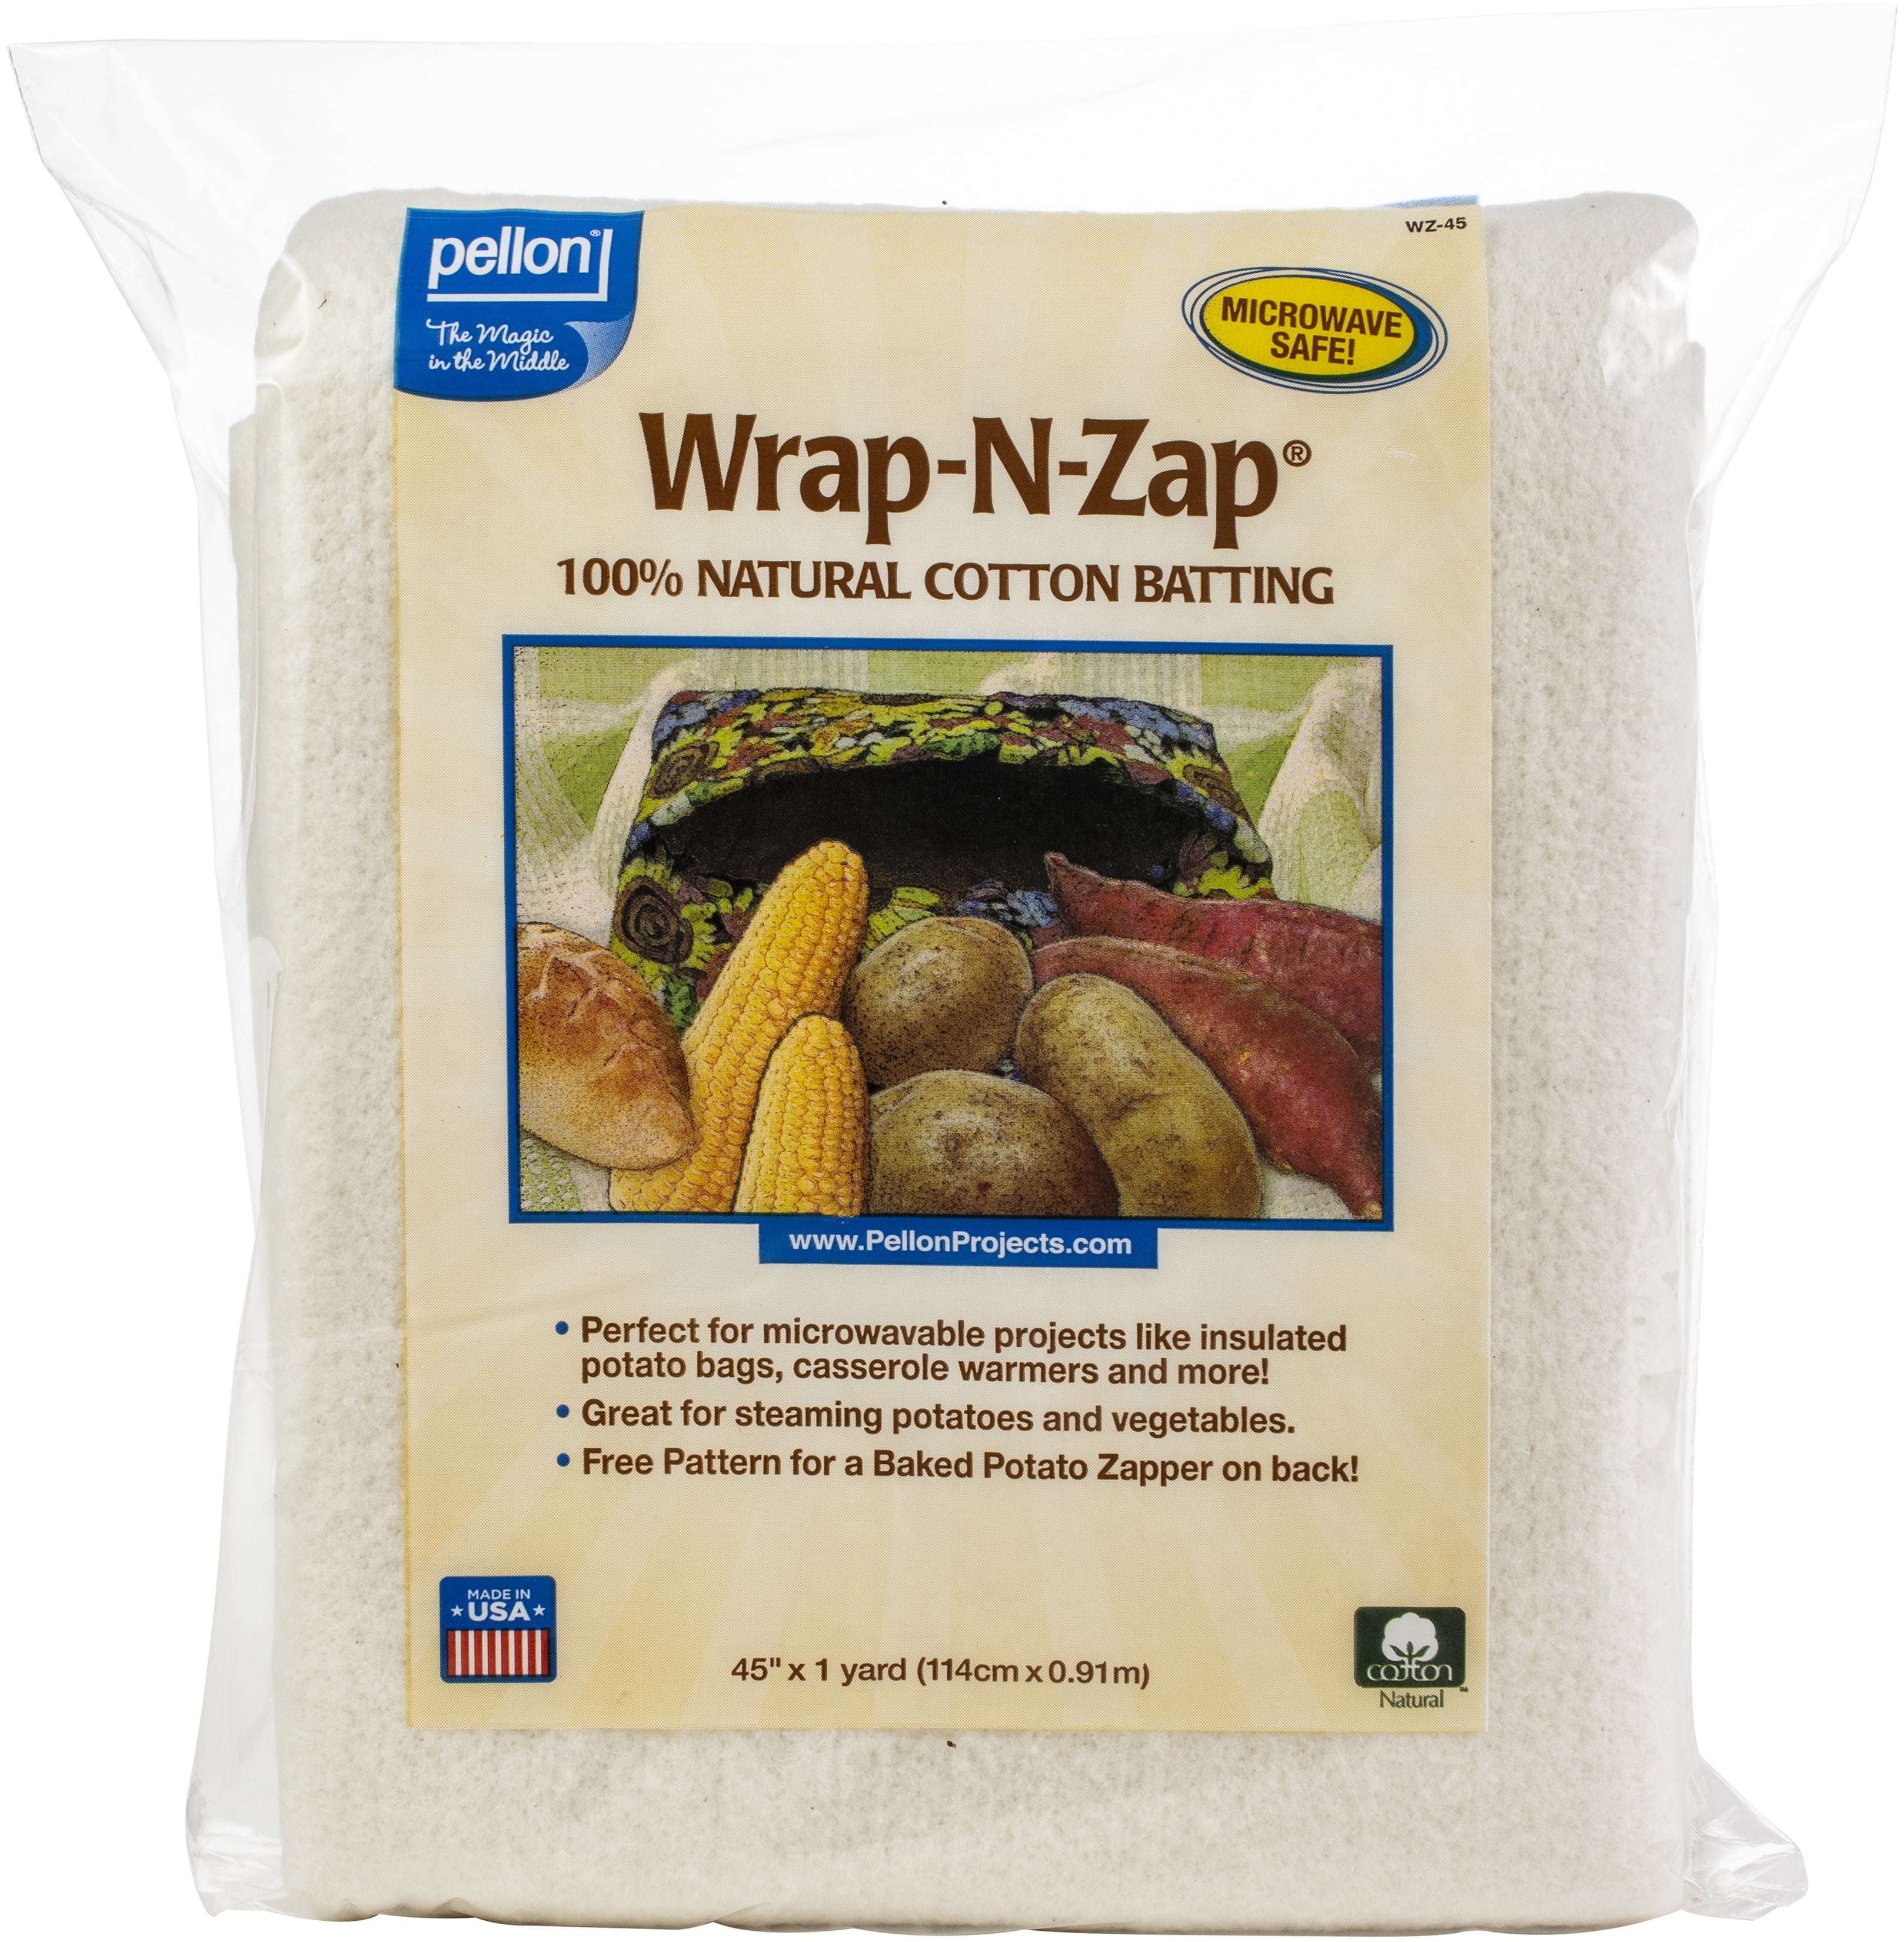 Pellon Wrap-N-Zap Microwavable Natural Cotton Batting for Crafts 45” x 36”  (1 yard pre-cut) Oven Mitts Cozies Machine Washable Low Loft